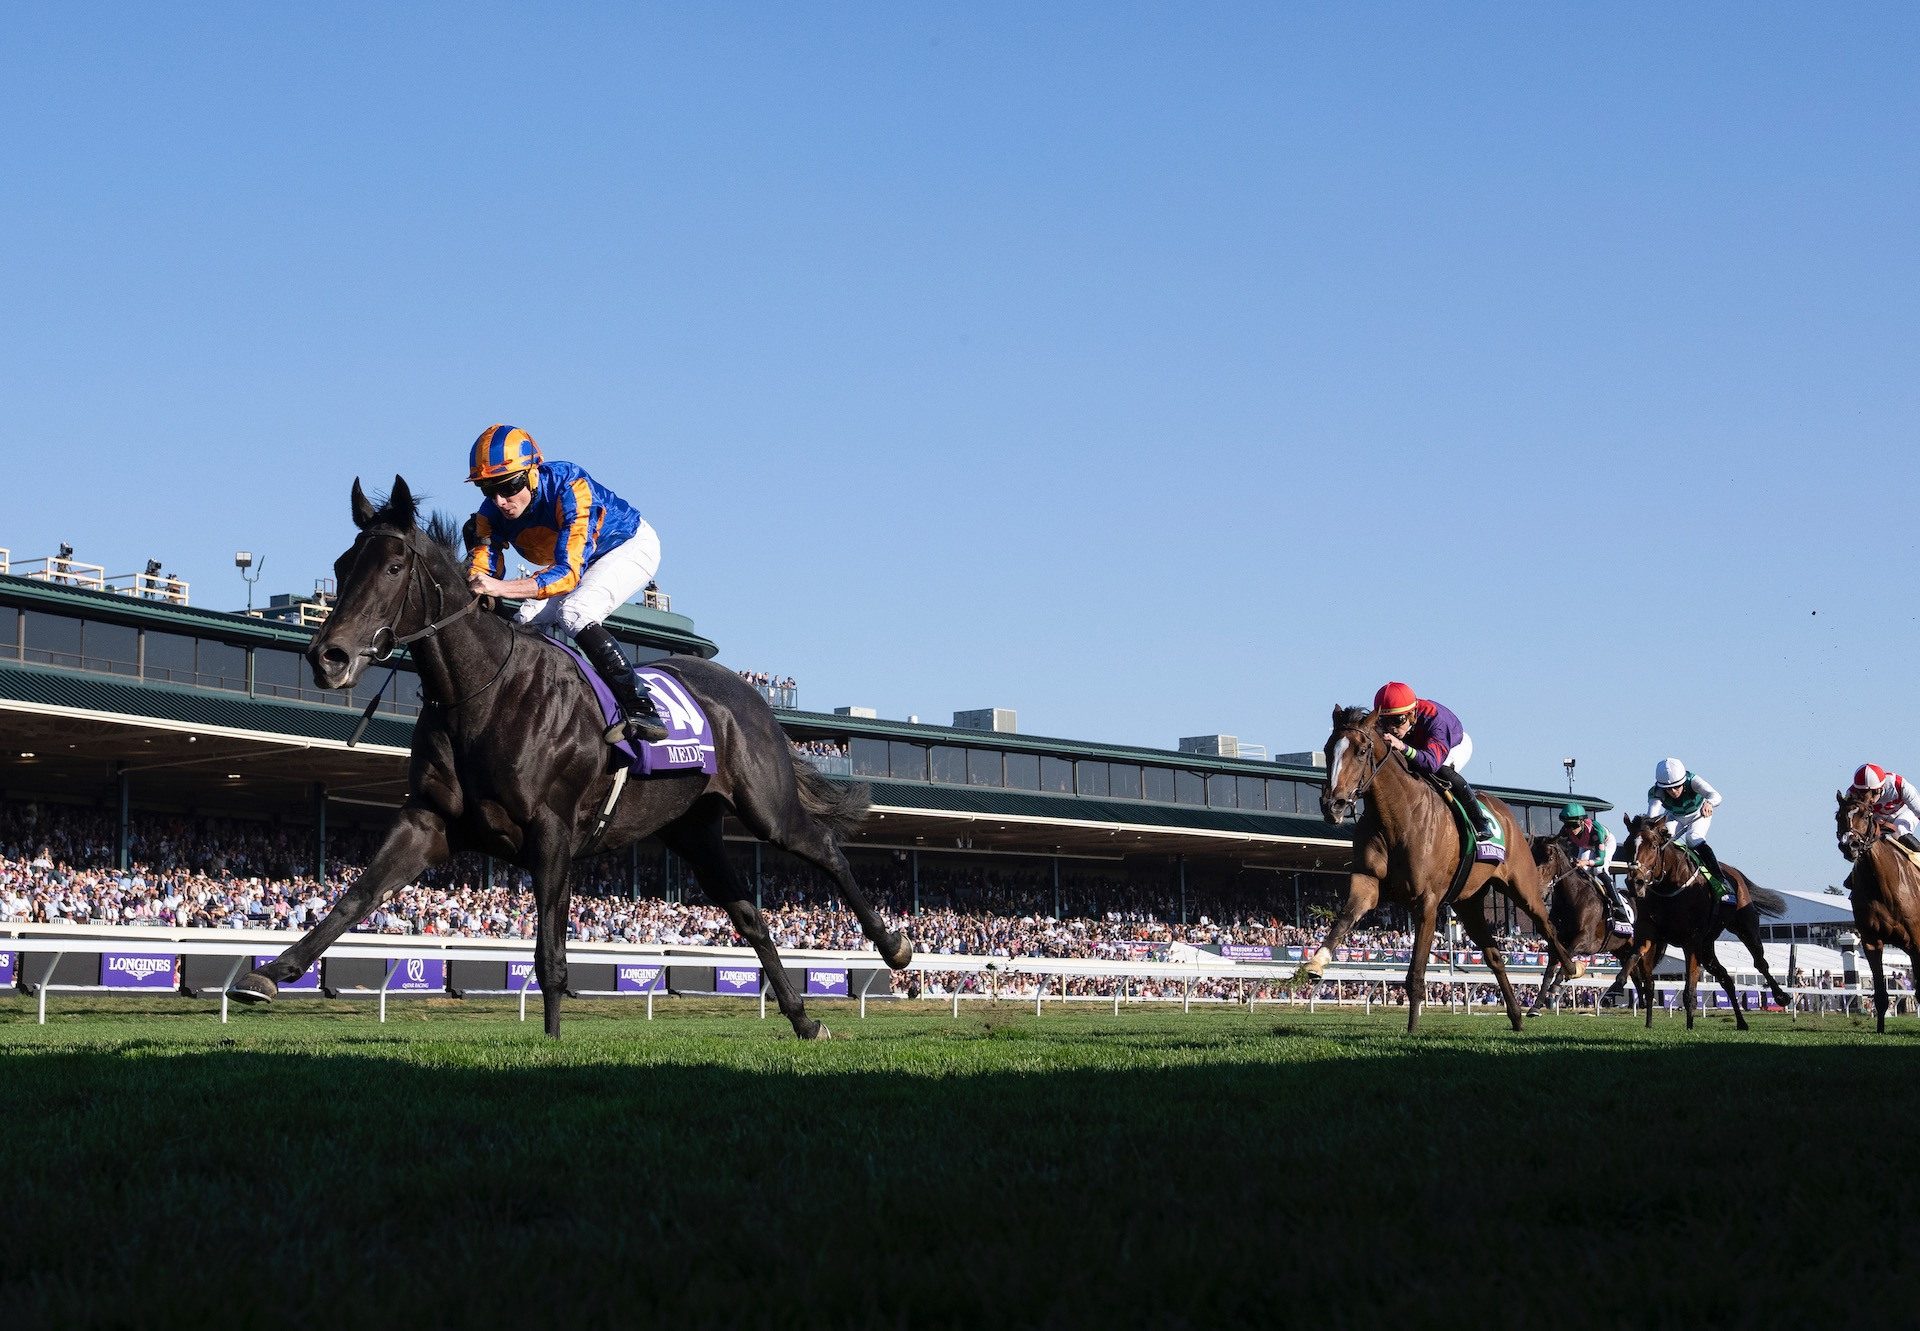 Meditate (No Nay Never) Wins The Grade 1 Breeders’ Cup Juvenile Fillies Turf at Keeneland